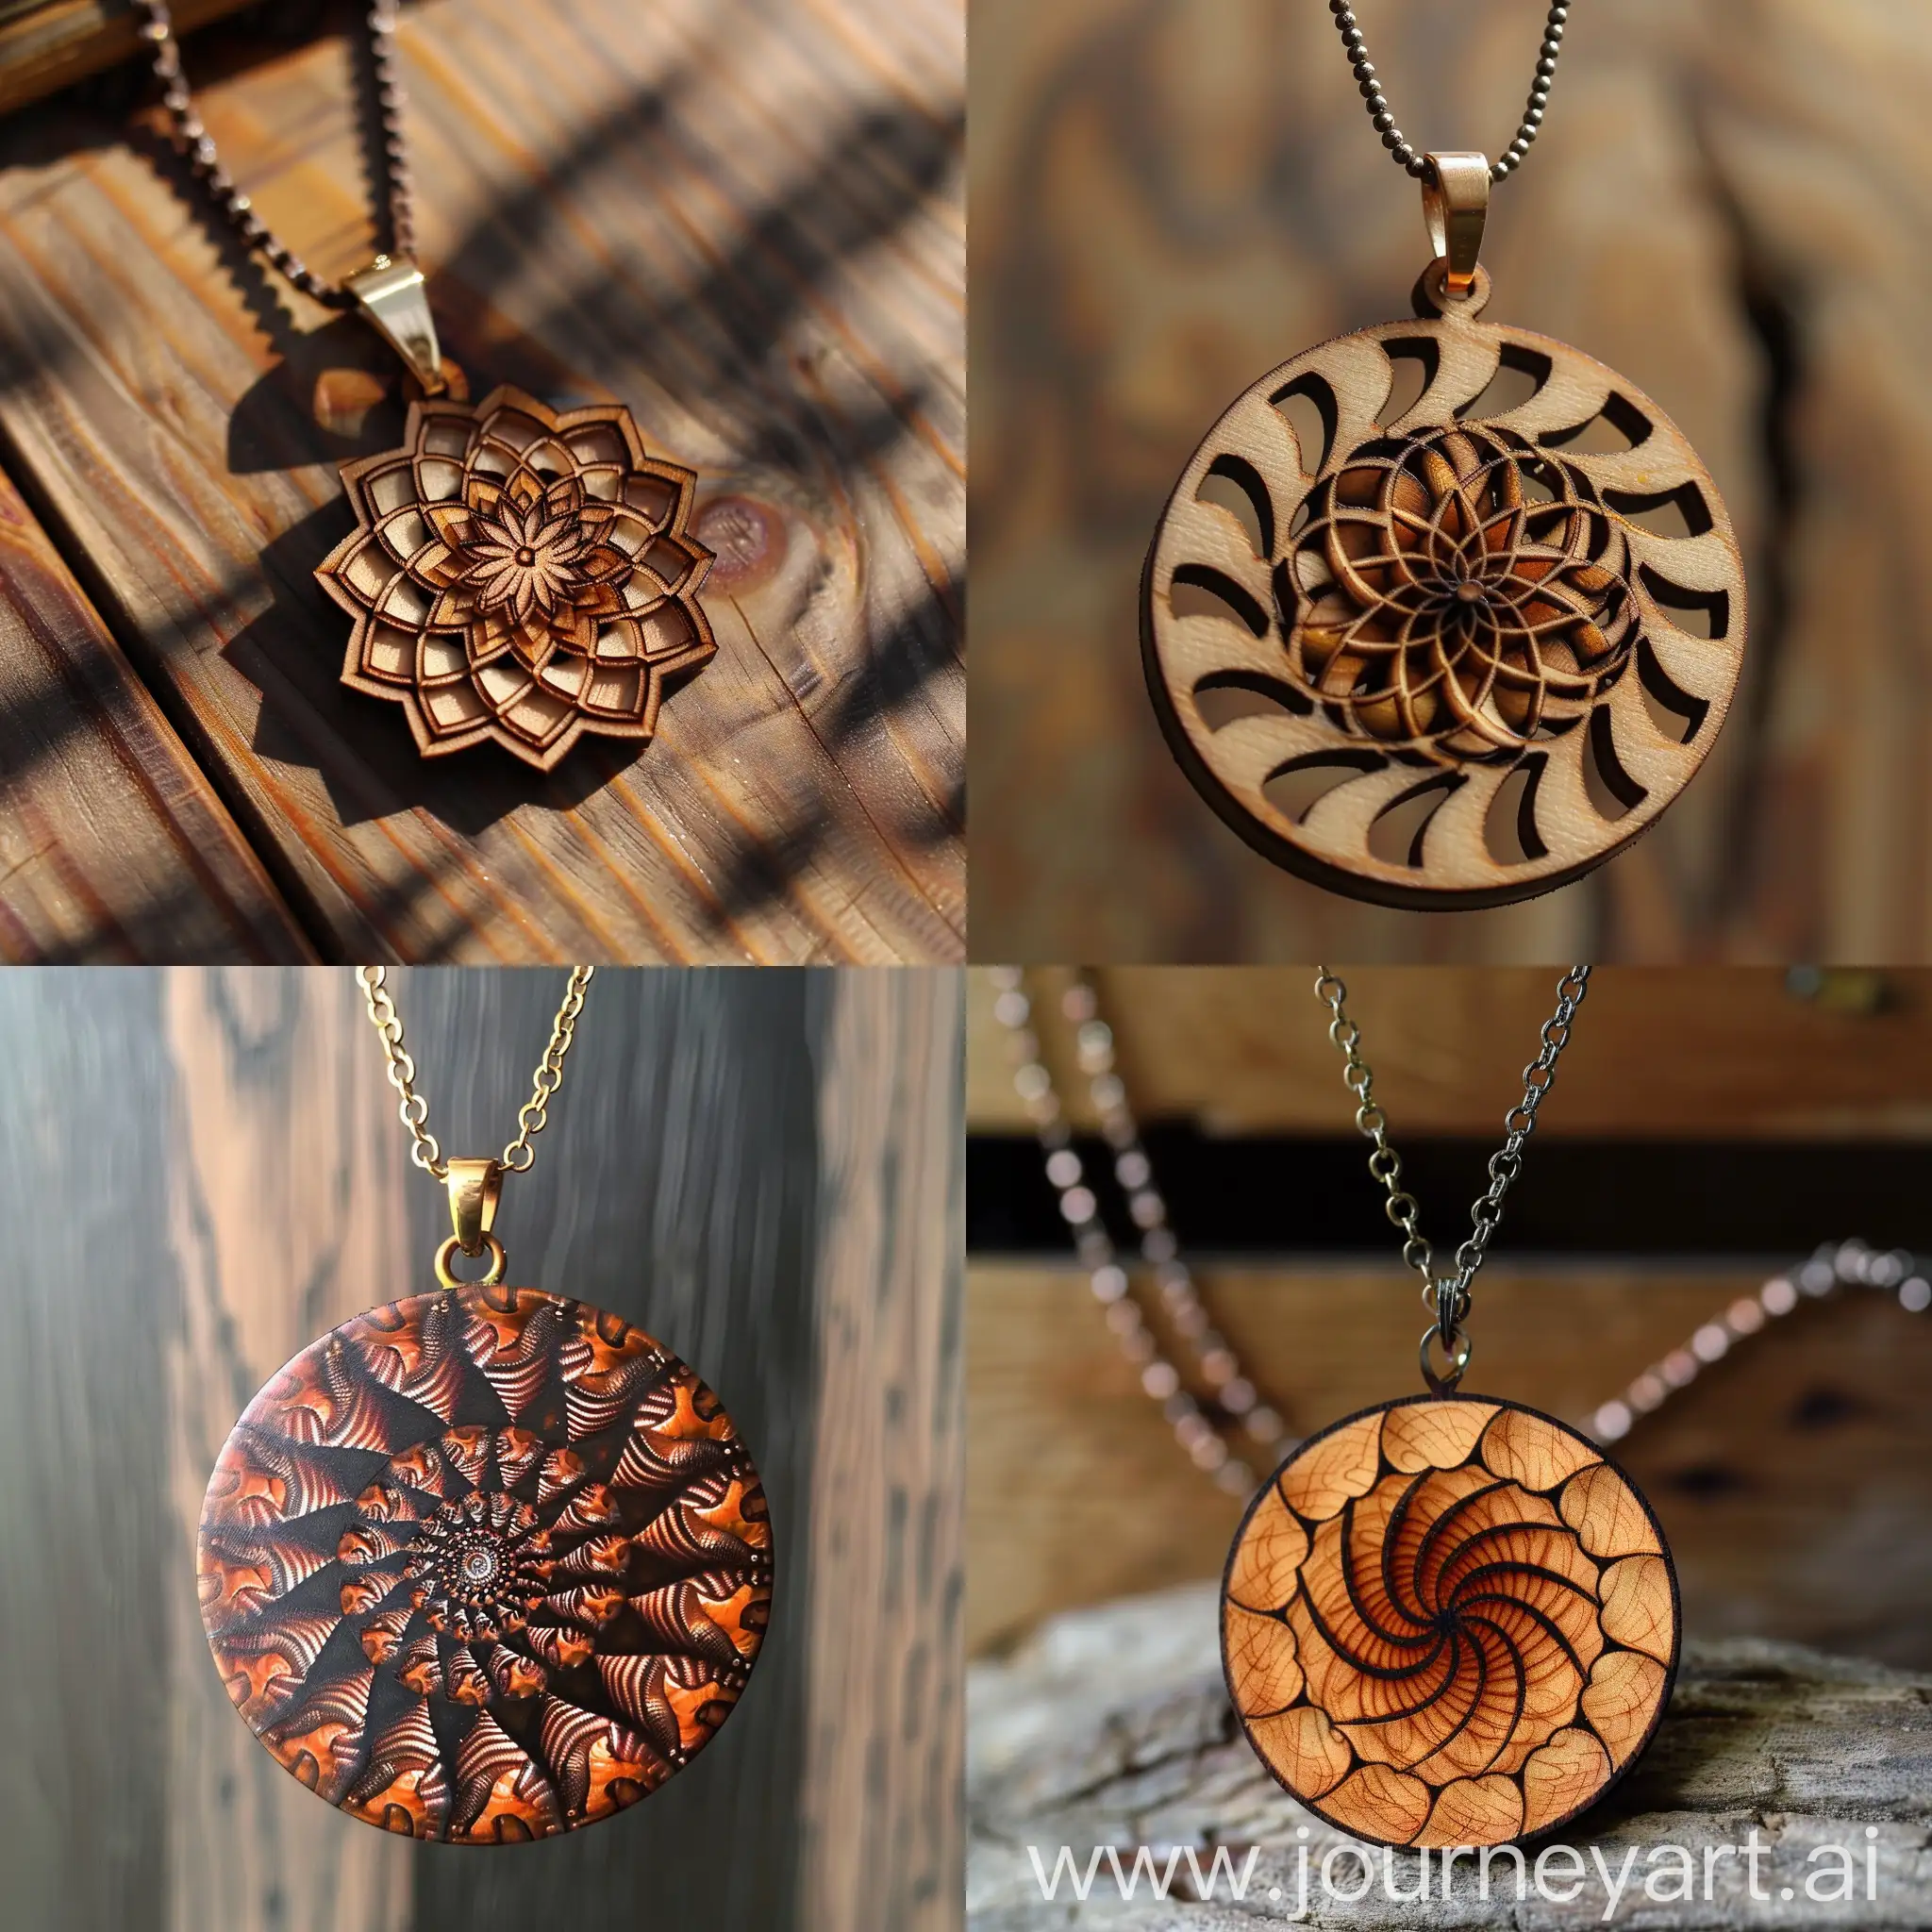 Wooden-Fractal-Necklace-Pendant-Intricate-Handcrafted-Jewelry